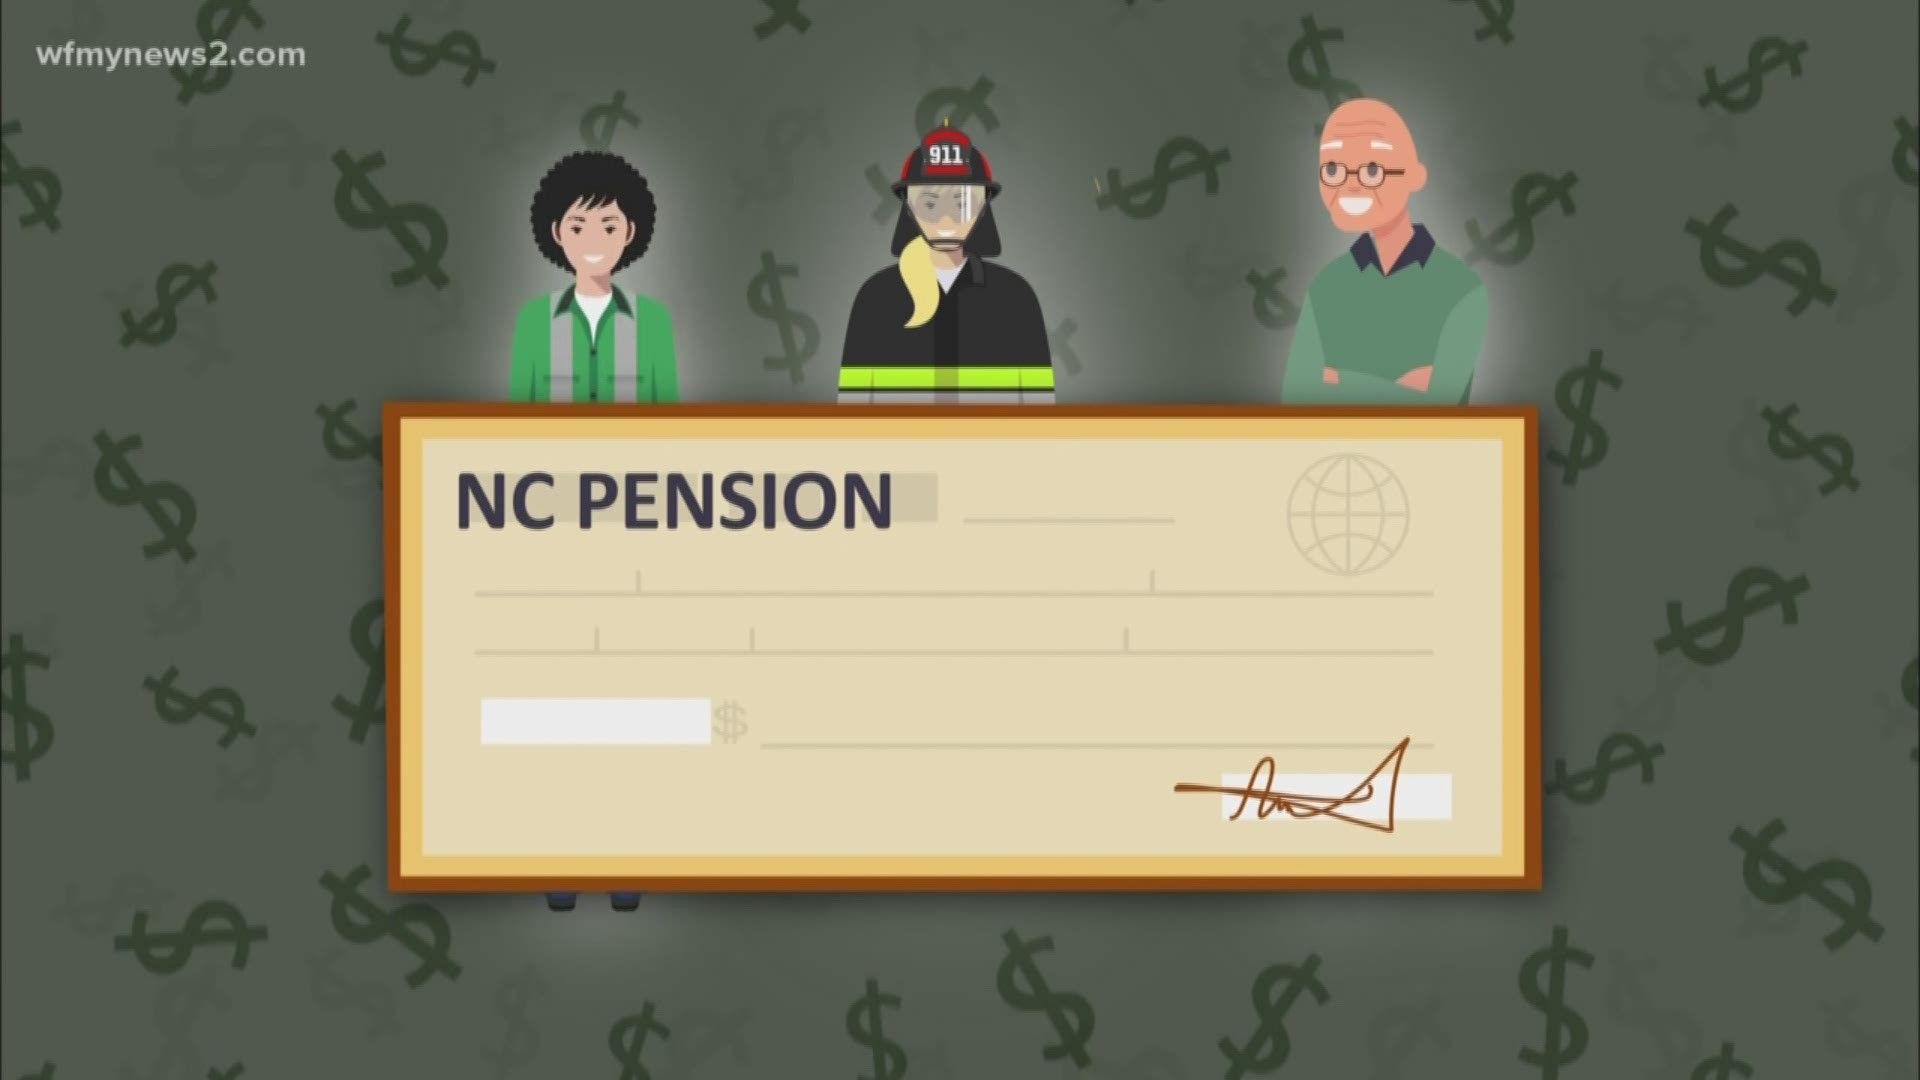 Regardless of who you work for we all help fund the pension fund.